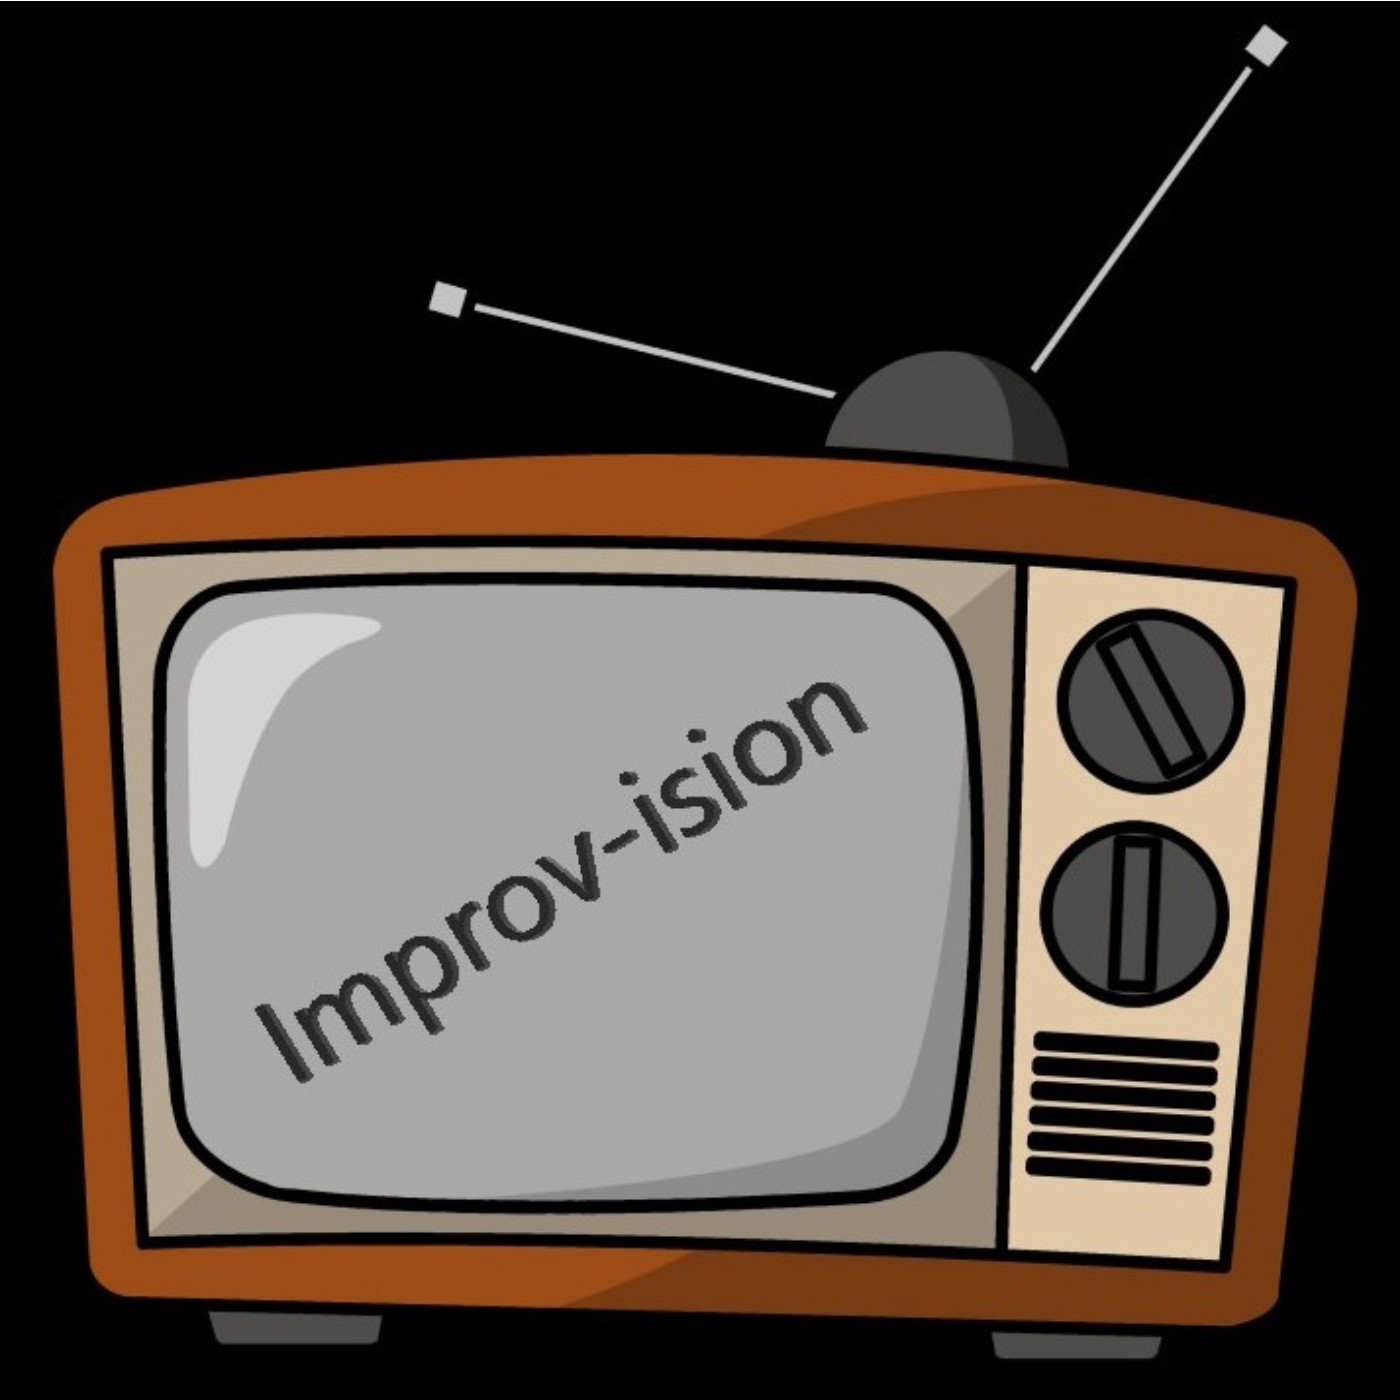 Improv-ision Podcast Survivor / TV Edition 12/15/17 Mike Chrissie are too lazy to look for Ben / Devon - final three with _____ / Ryan - Lap dog extraordinaire! / Stripped  / SMILF / Amazing Race